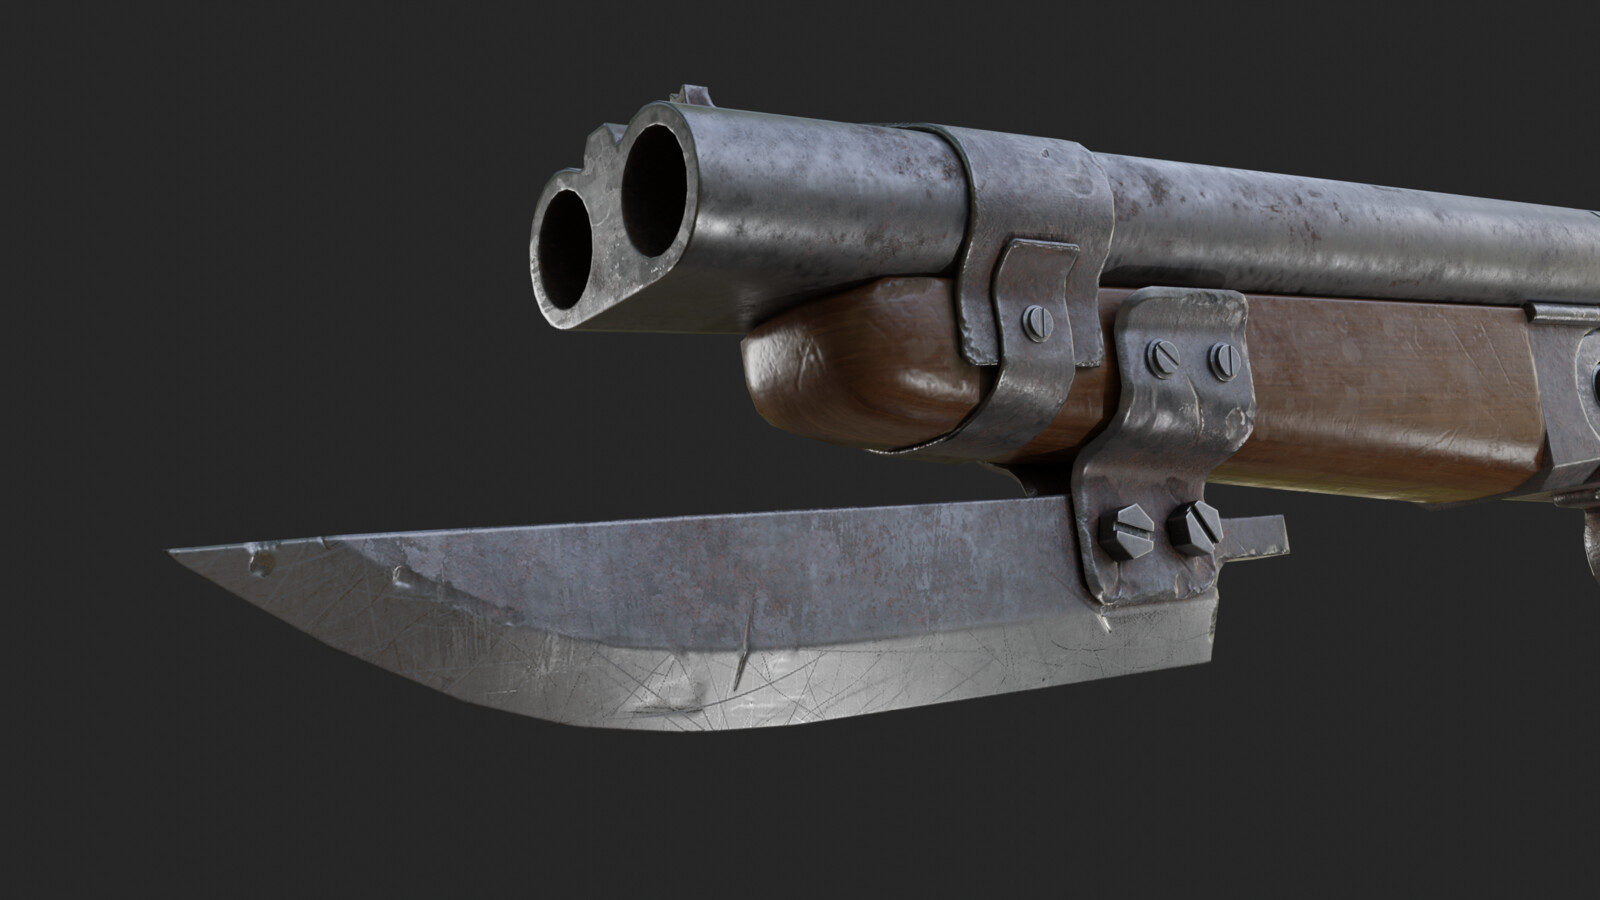 Bayonet attachment is my own design. Just large knife bolted on the gun. Tried to make look as  "mean" as possible.